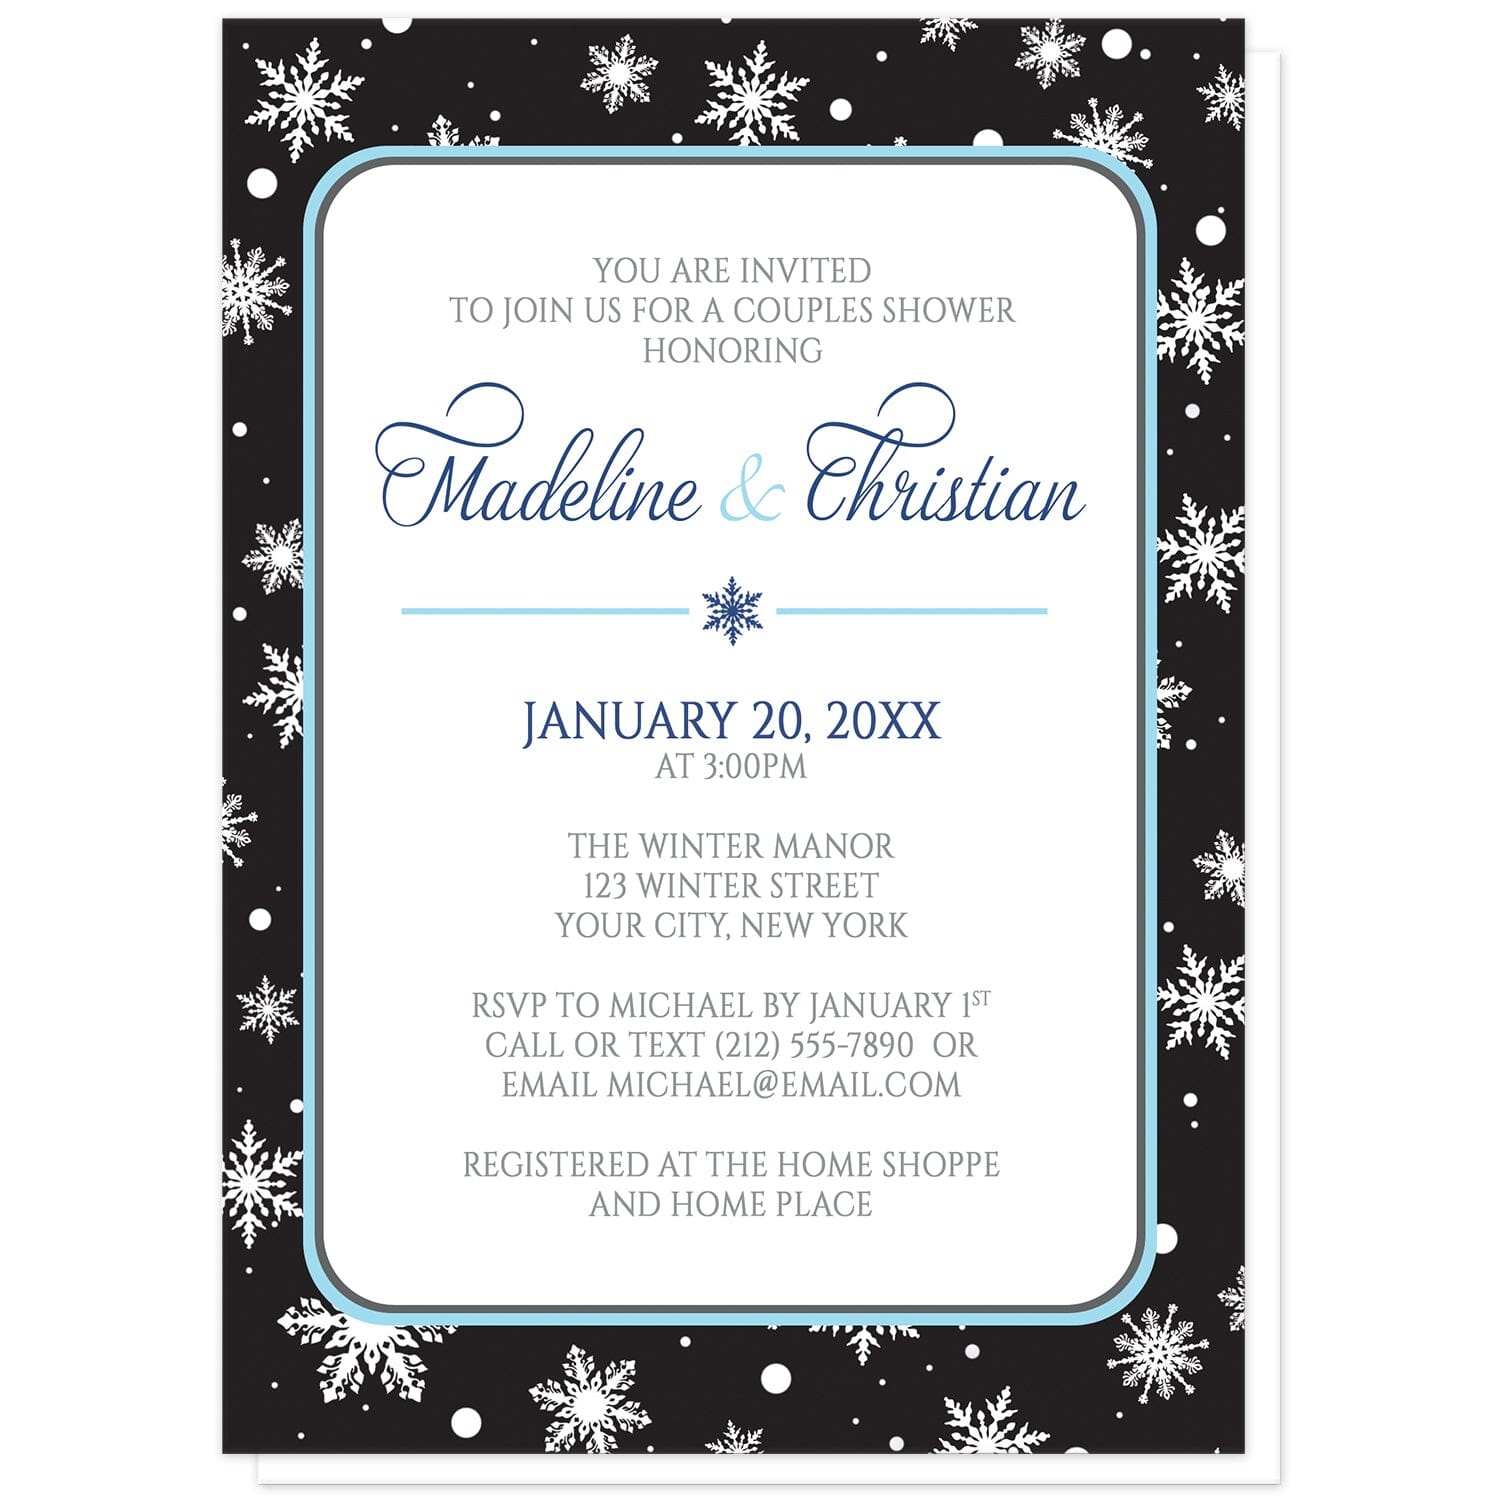 Midnight Snowflake Winter Couples Shower Invitations at Artistically Invited. Midnight snowflake winter couples shower invitations with white snowflakes over a black background. Your personalized couples shower celebration details are custom printed in navy blue, aqua blue, and medium gray over a white rectangular area outlined in aqua and navy blue.